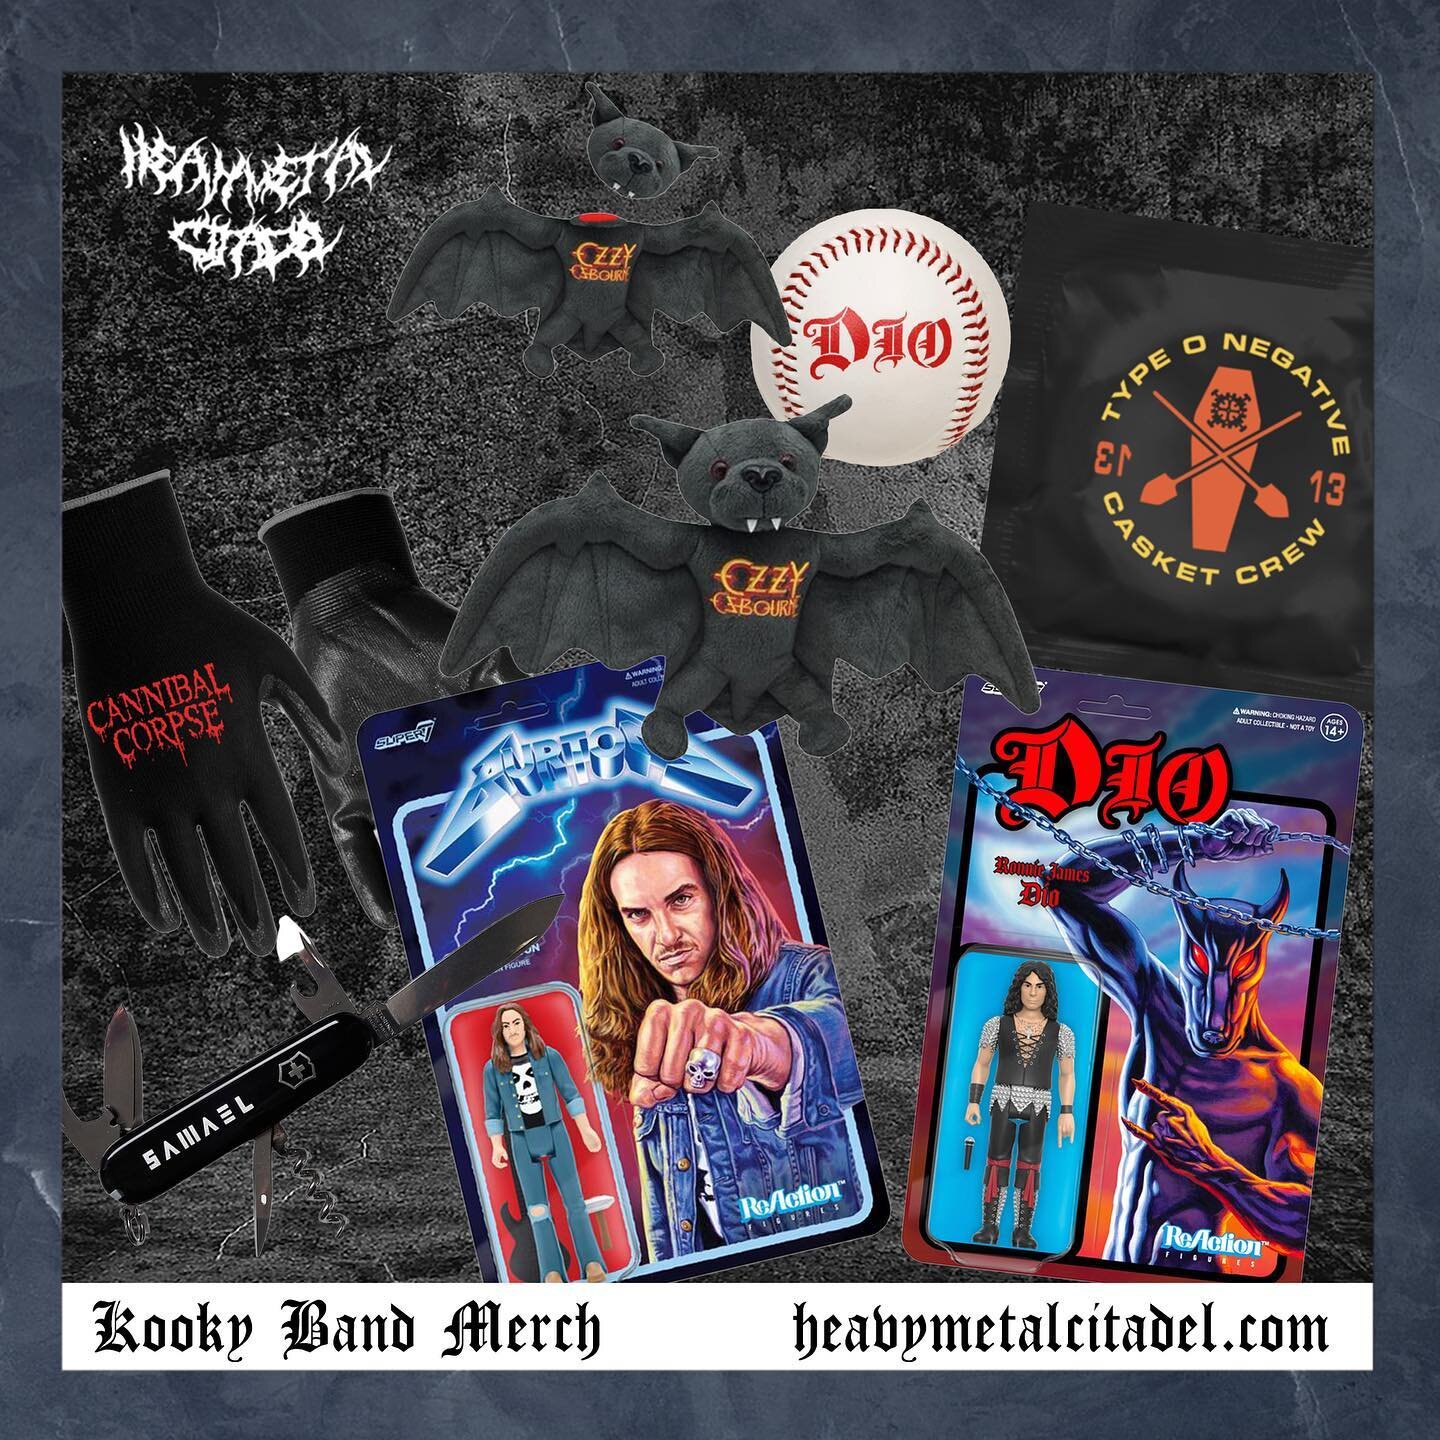 🔥KOOKY BAND MERCH🔥Citadelians, if you're looking for more kooky and unusual band merch, head over to our Metal Merch Bazaar page on heavymetalcitadel.com. We've got some merch from @typeonegativeofficial, @cannibalcorpseofficial, @behemothofficial,